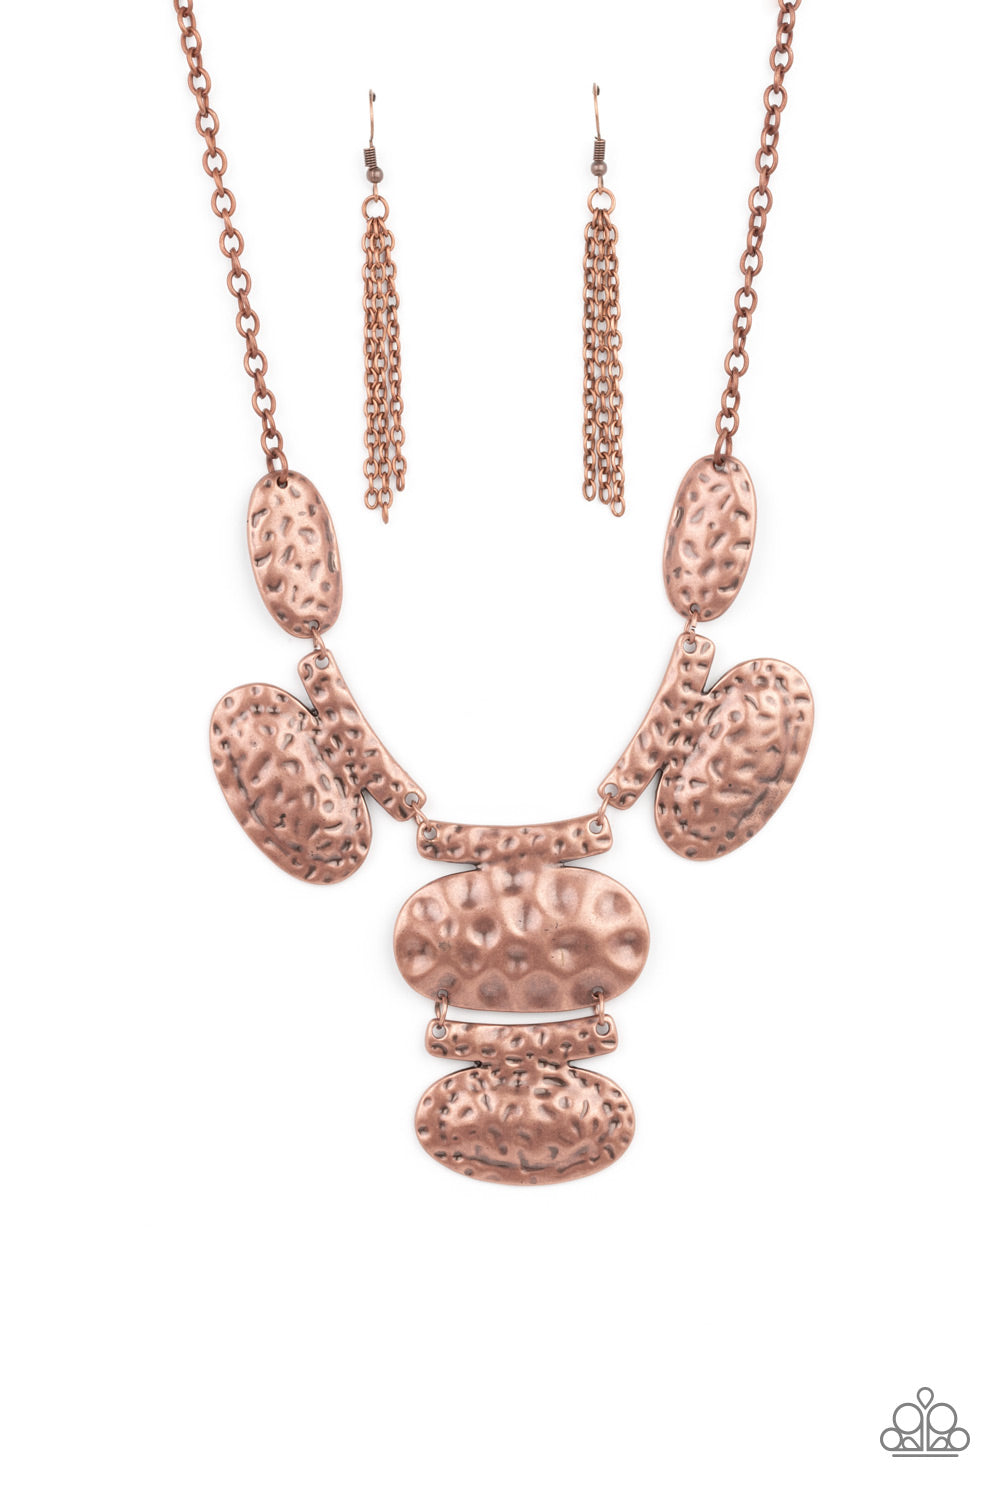 Paparazzi Accessories Gallery Relic - Copper Necklaces - Lady T Accessories